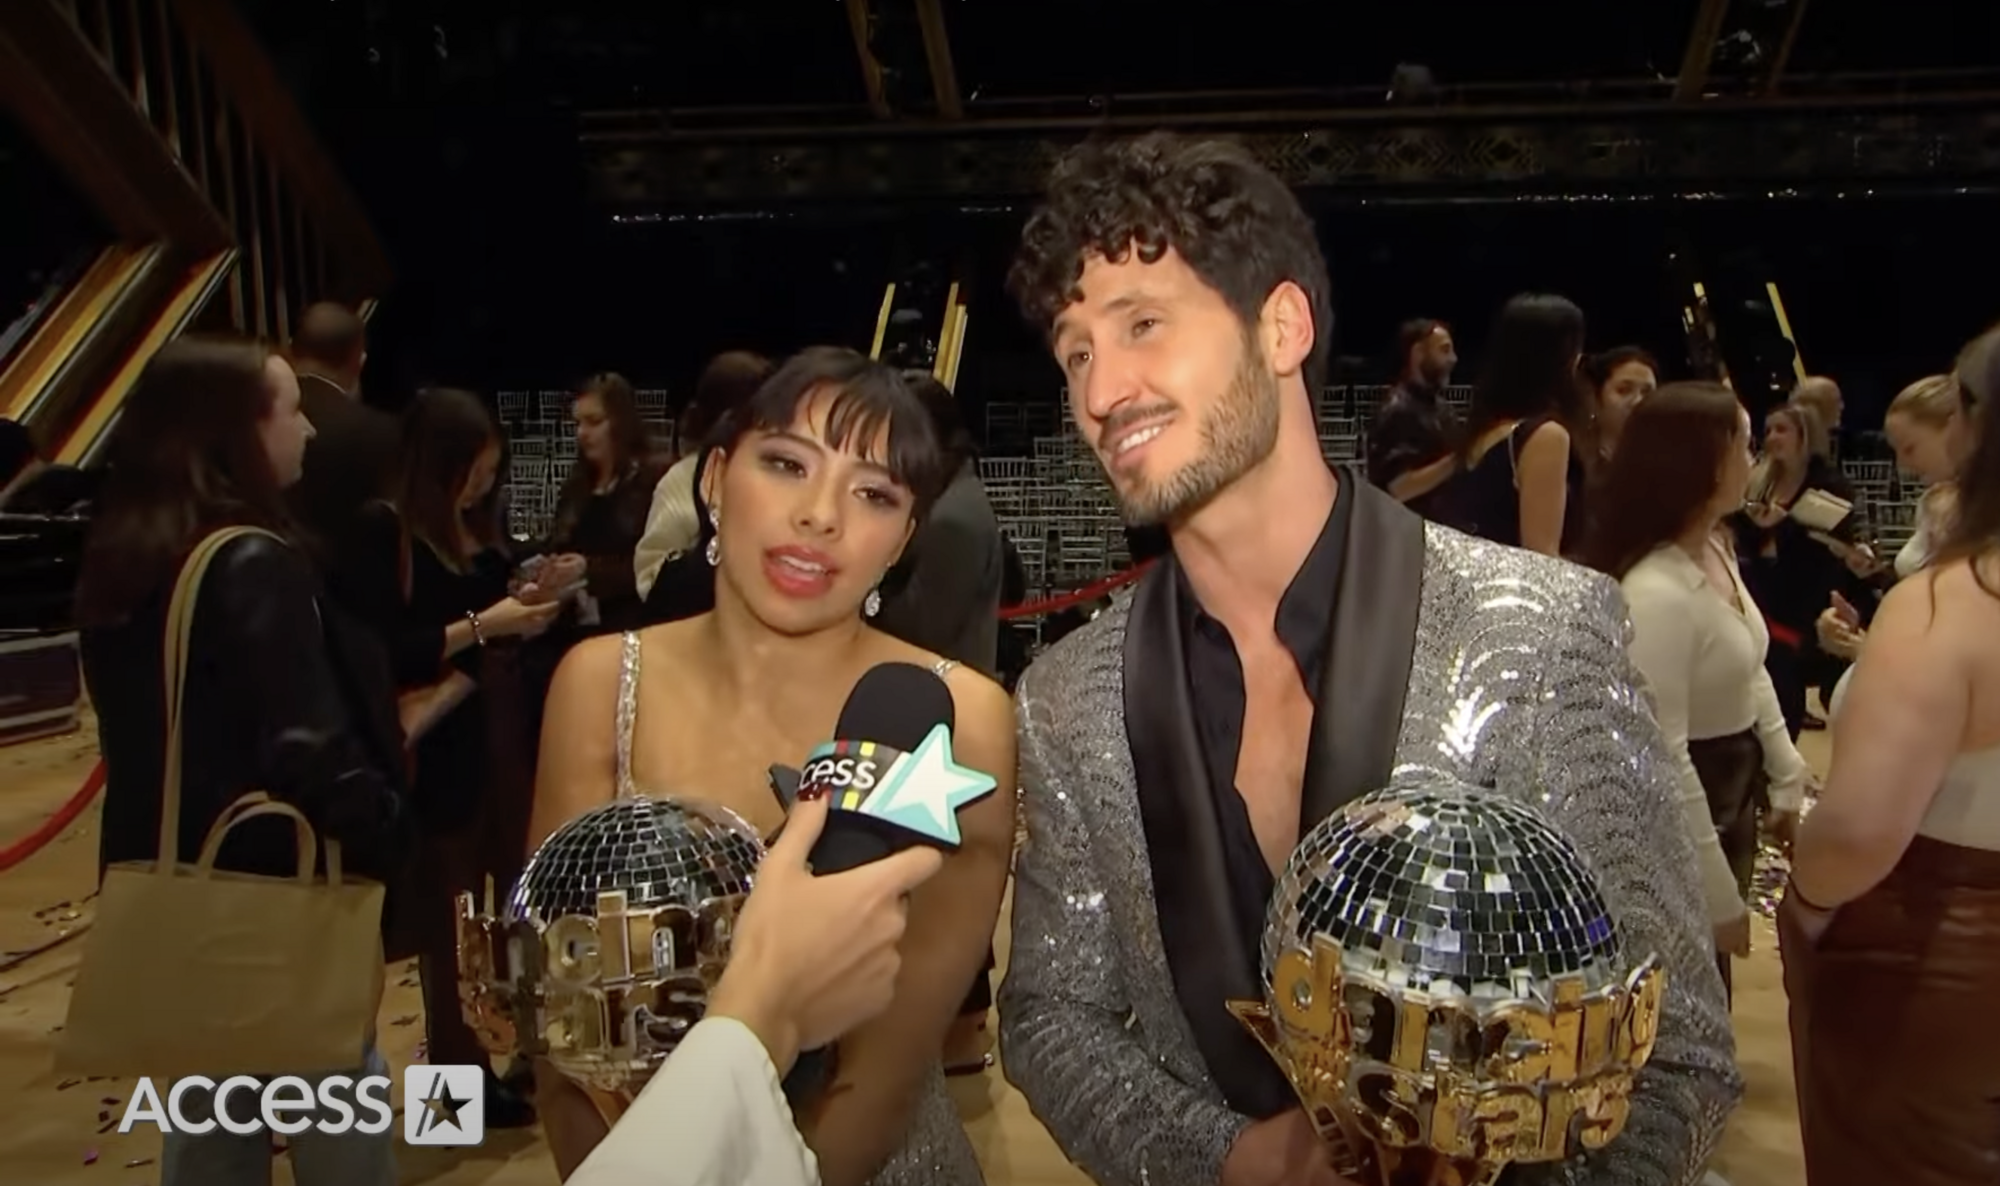 Choreographer Chmerkovskyi, whose brother fled Ukraine, won on the American ''Dancing with the Stars''